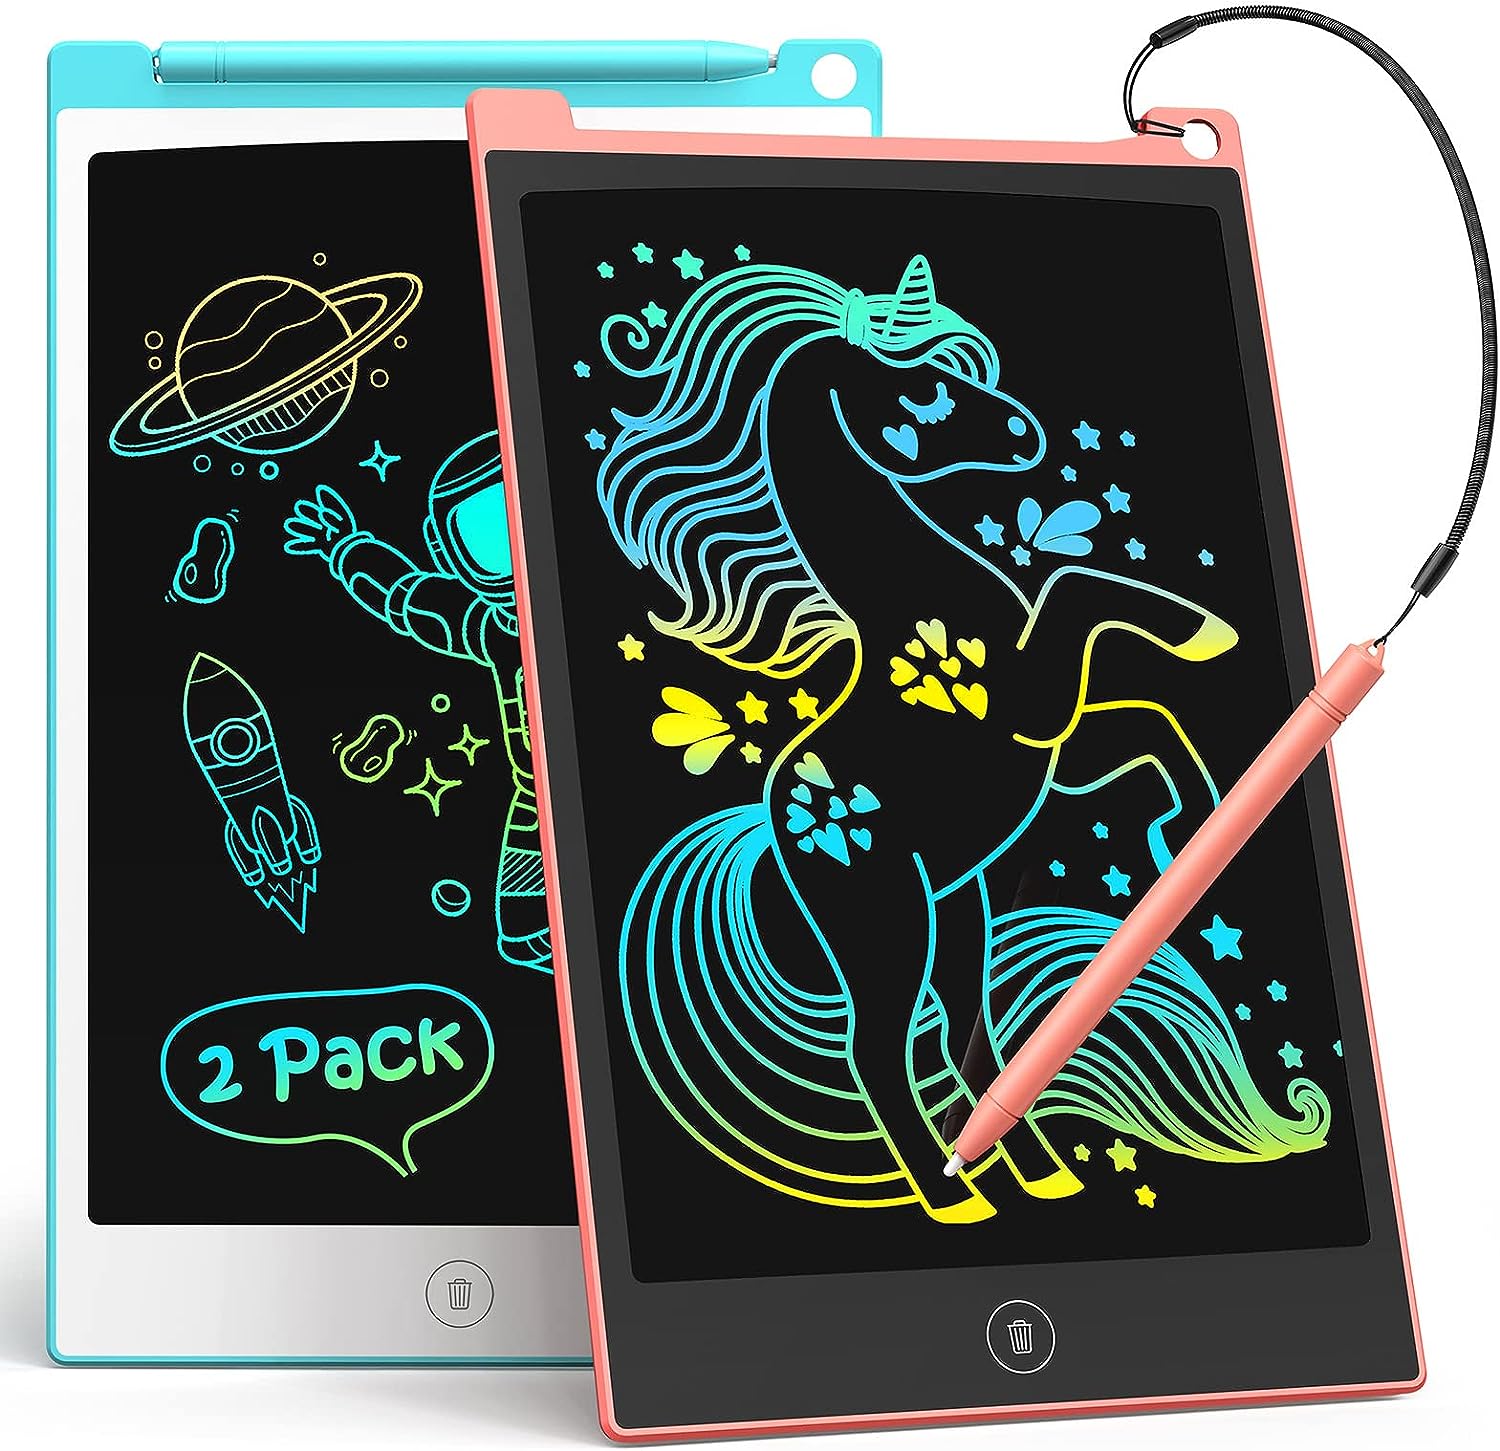 TECJOE 2 Pack LCD Writing Tablet, 8.5 Inch Colorful [...]